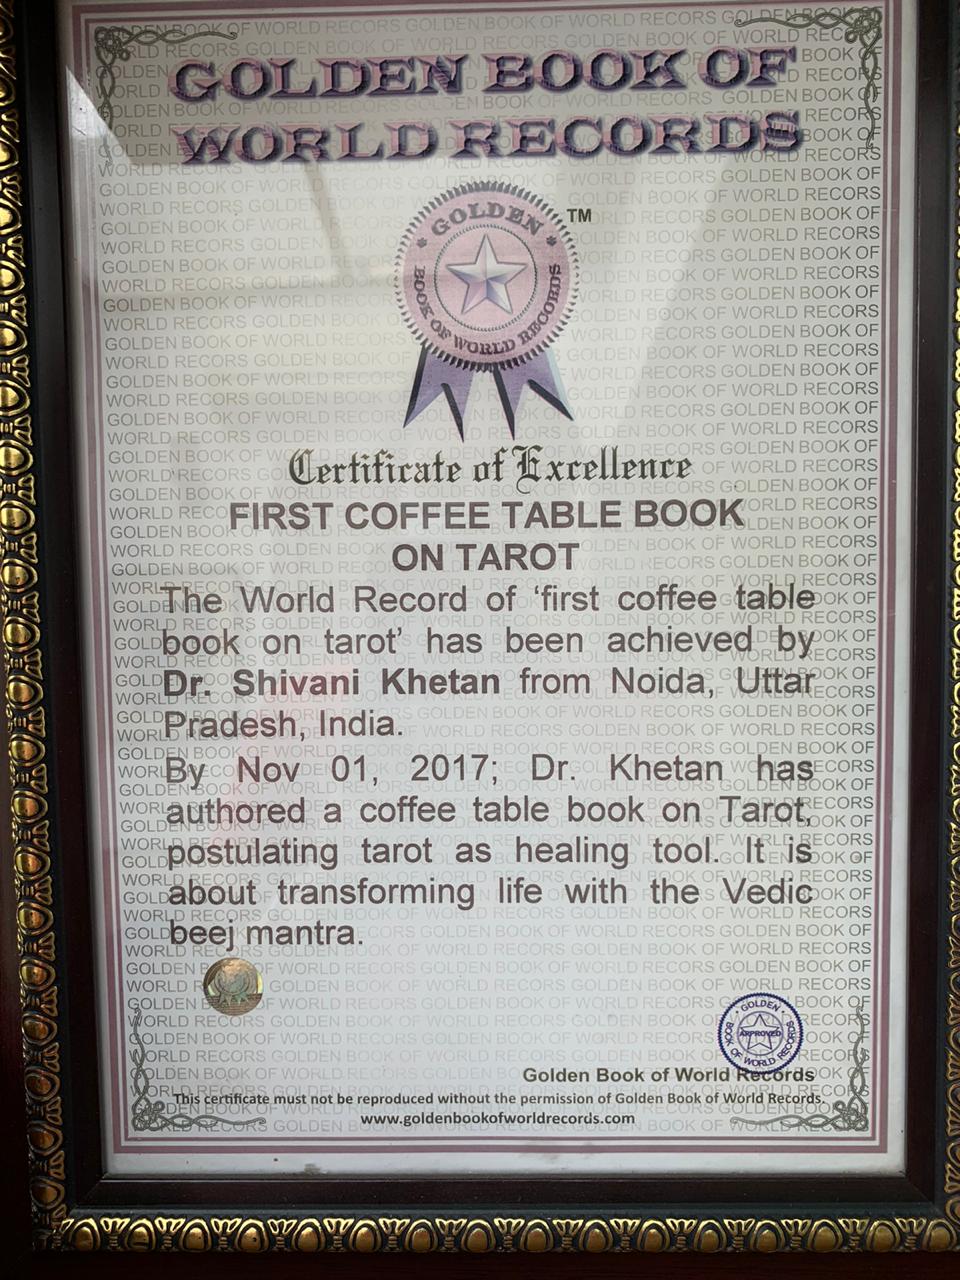 Golden book of world record